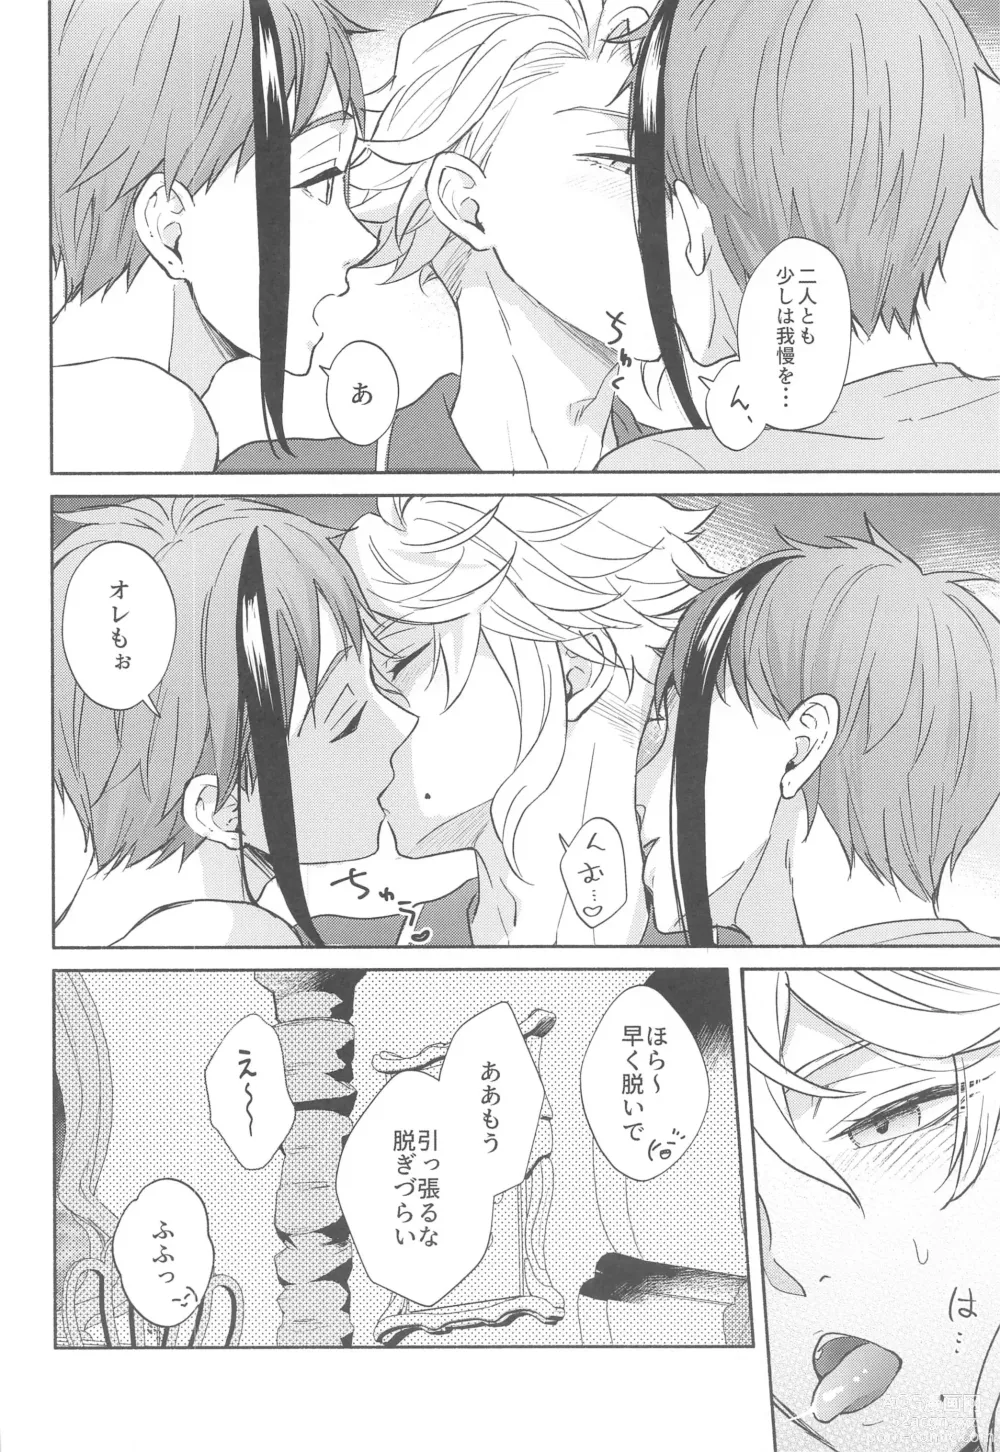 Page 7 of doujinshi More, more, and more